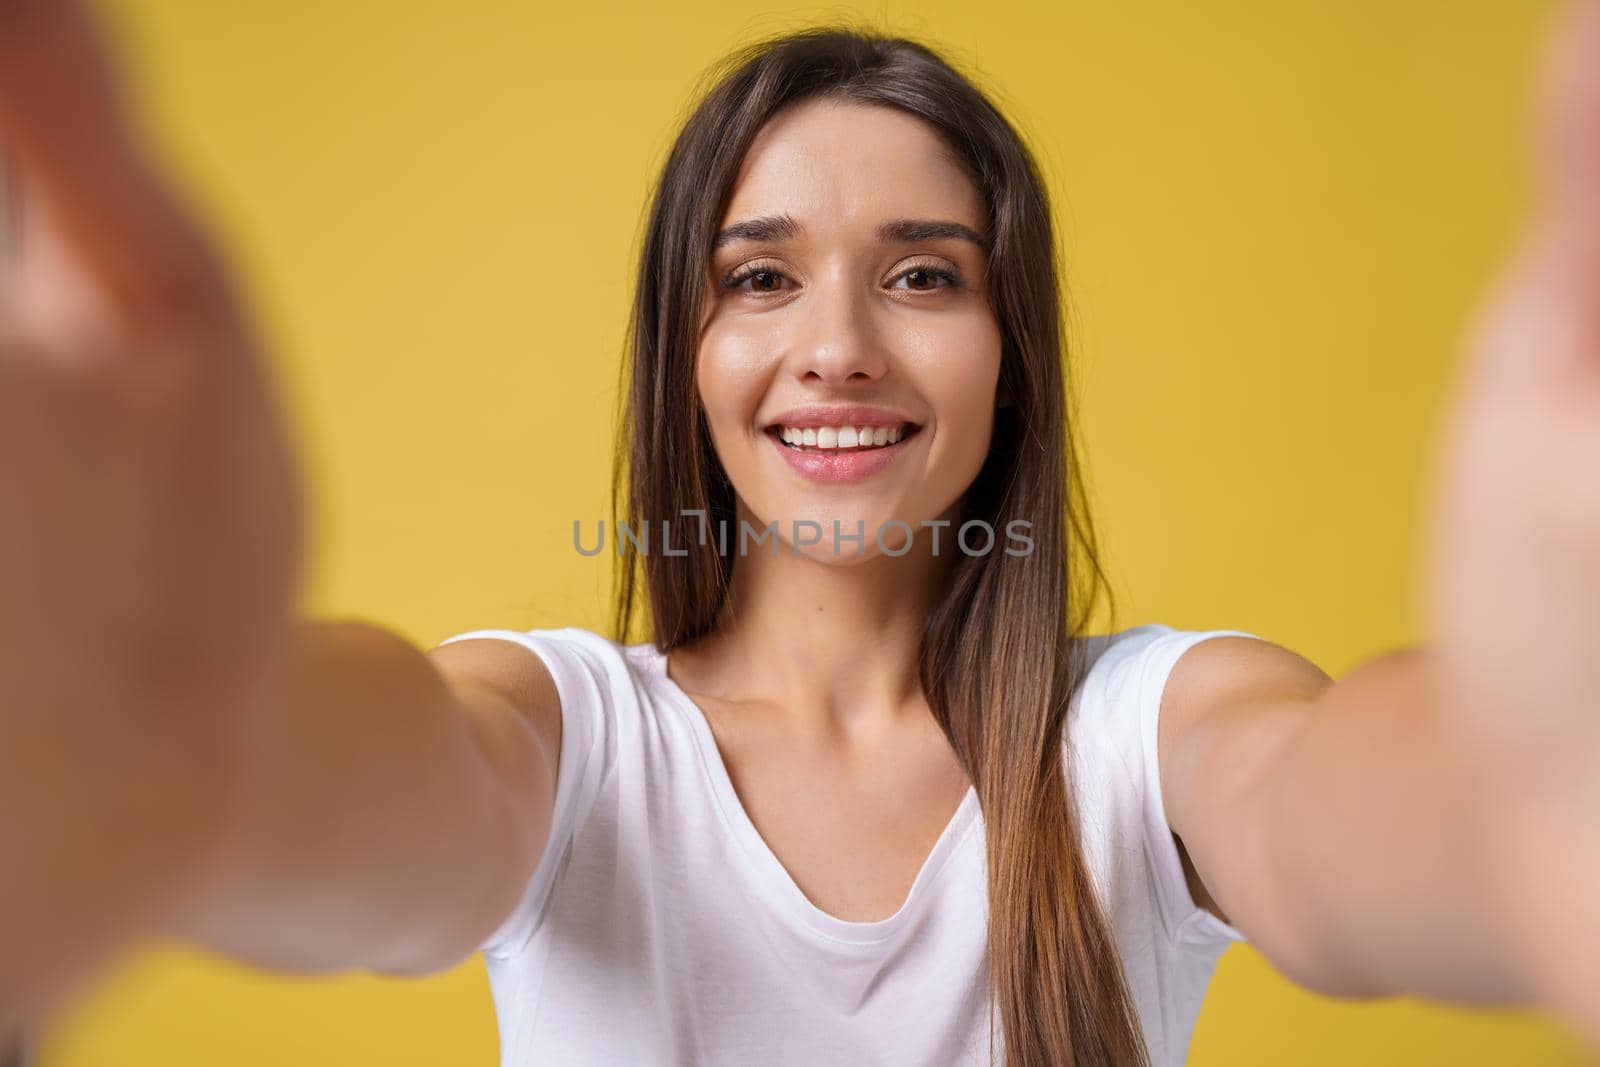 Pleasant attractive girl making selfie in studio and laughing. Good-looking young woman with brown hair taking picture of herself on bright yellow background